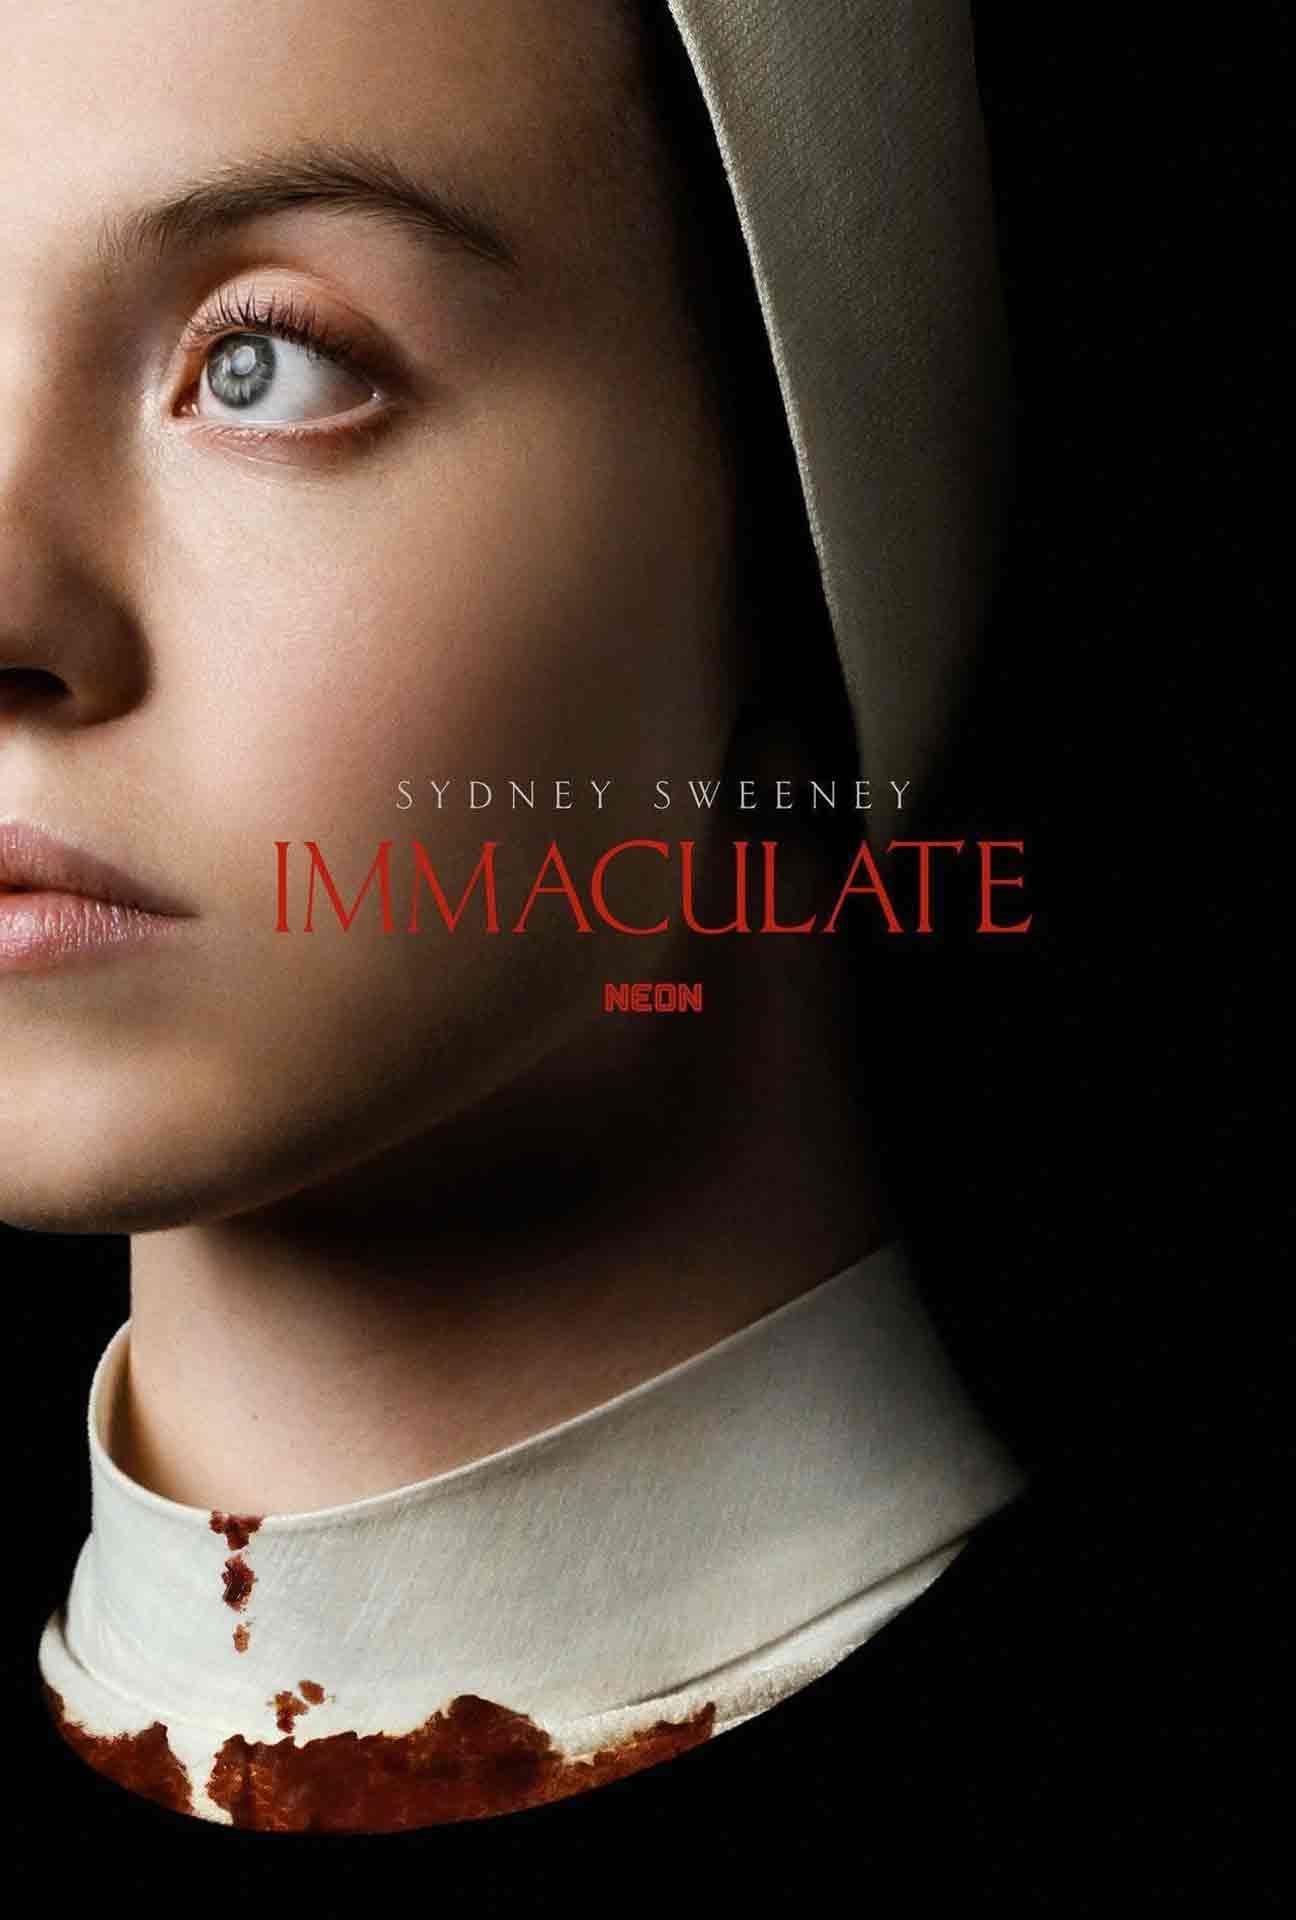 Movie Poster for Immaculate